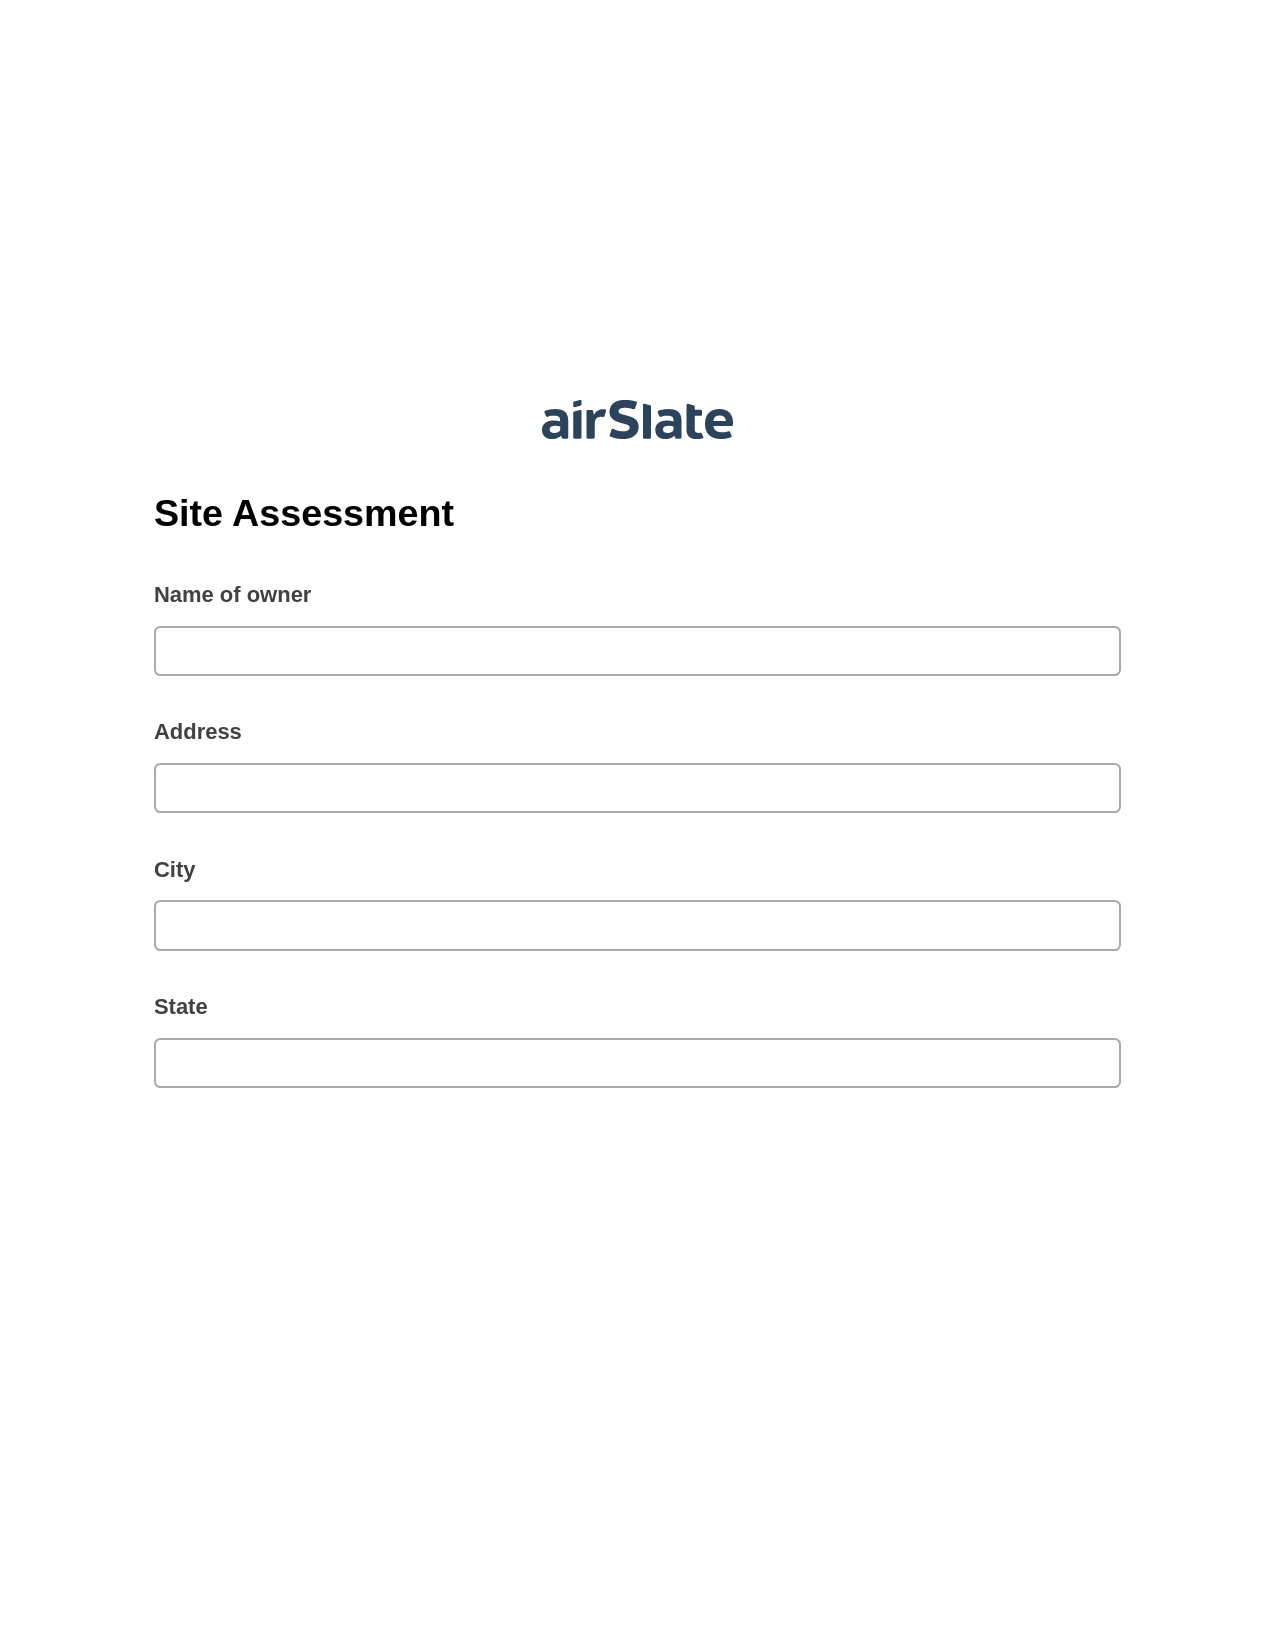 Site Assessment Pre-fill from CSV File Dropdown Options Bot, Lock the slate bot, Text Message Notification Postfinish Bot